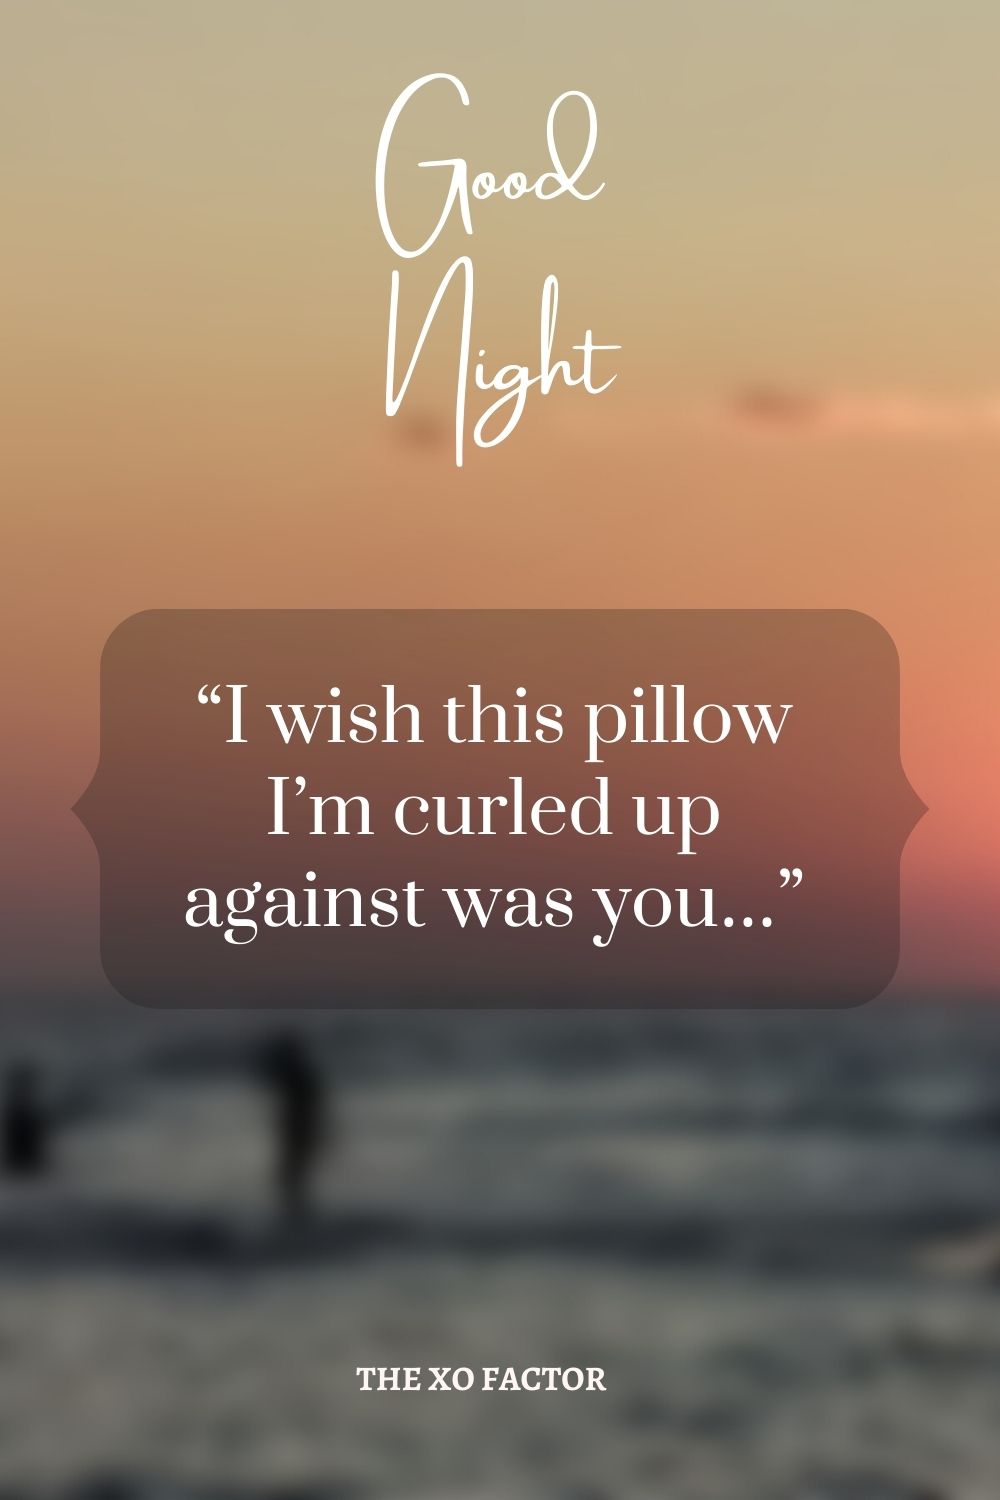 “I wish this pillow I’m curled up against was you…”